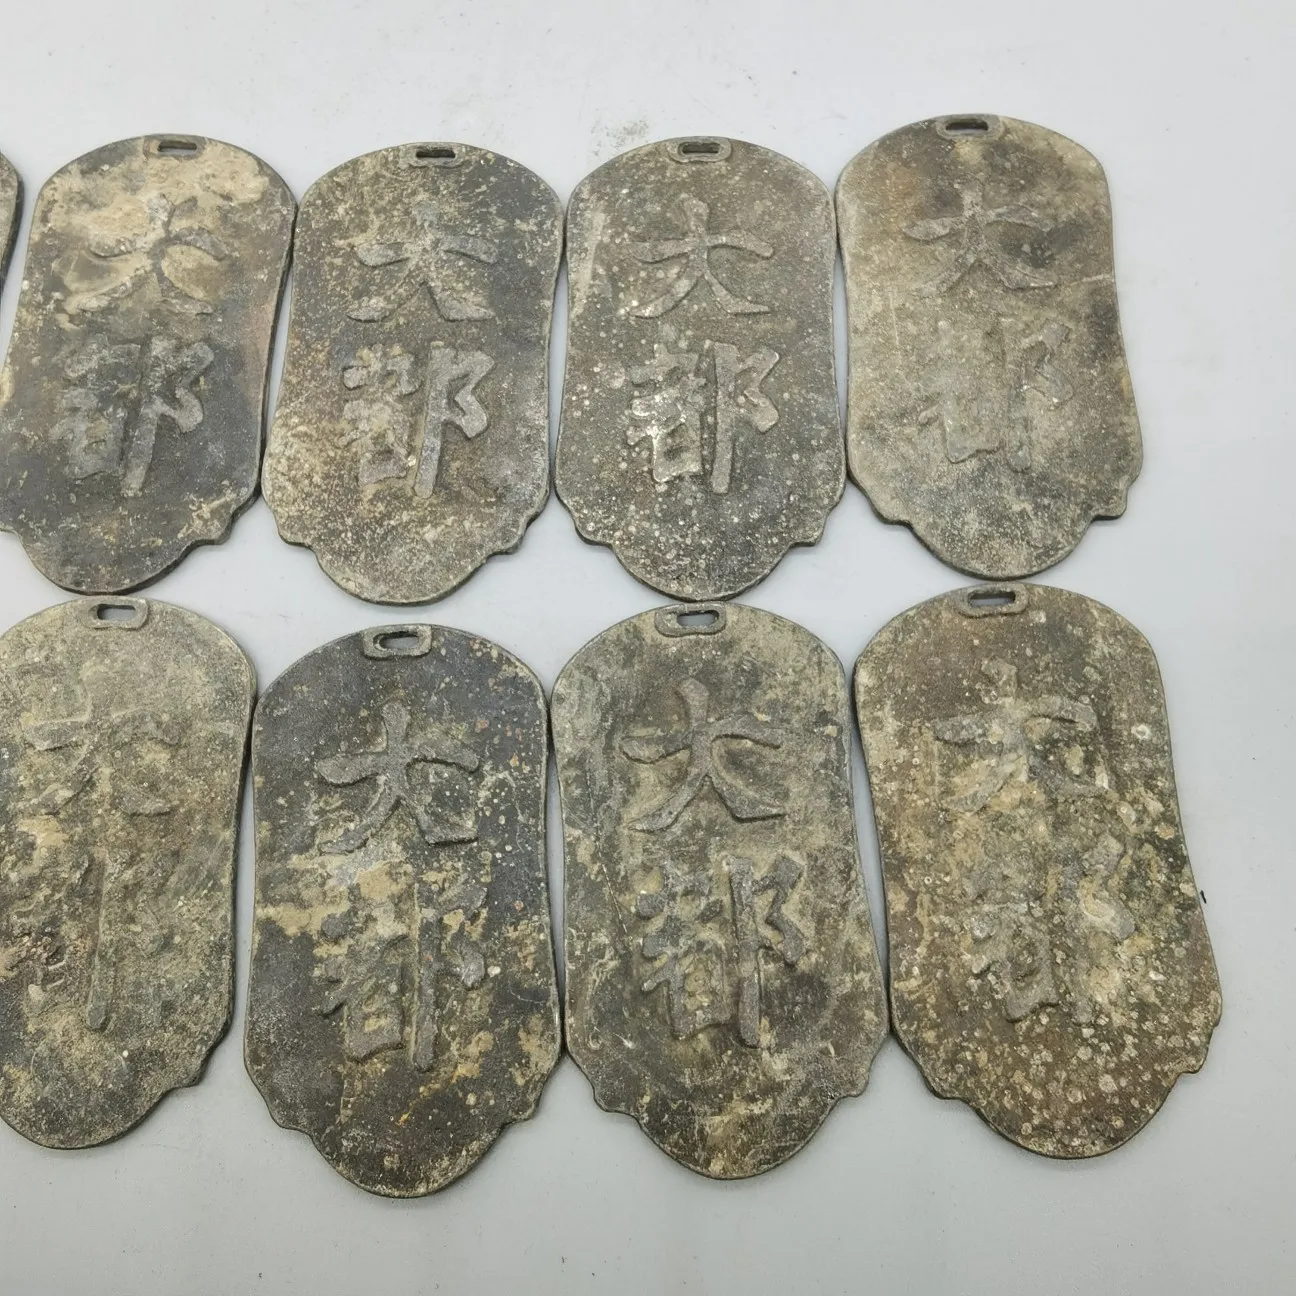 

A Set Of Yuan Dynasty Coins With Exquisite Craftsmanship And Beautiful Appearance Is Worth Collecting And Decorating